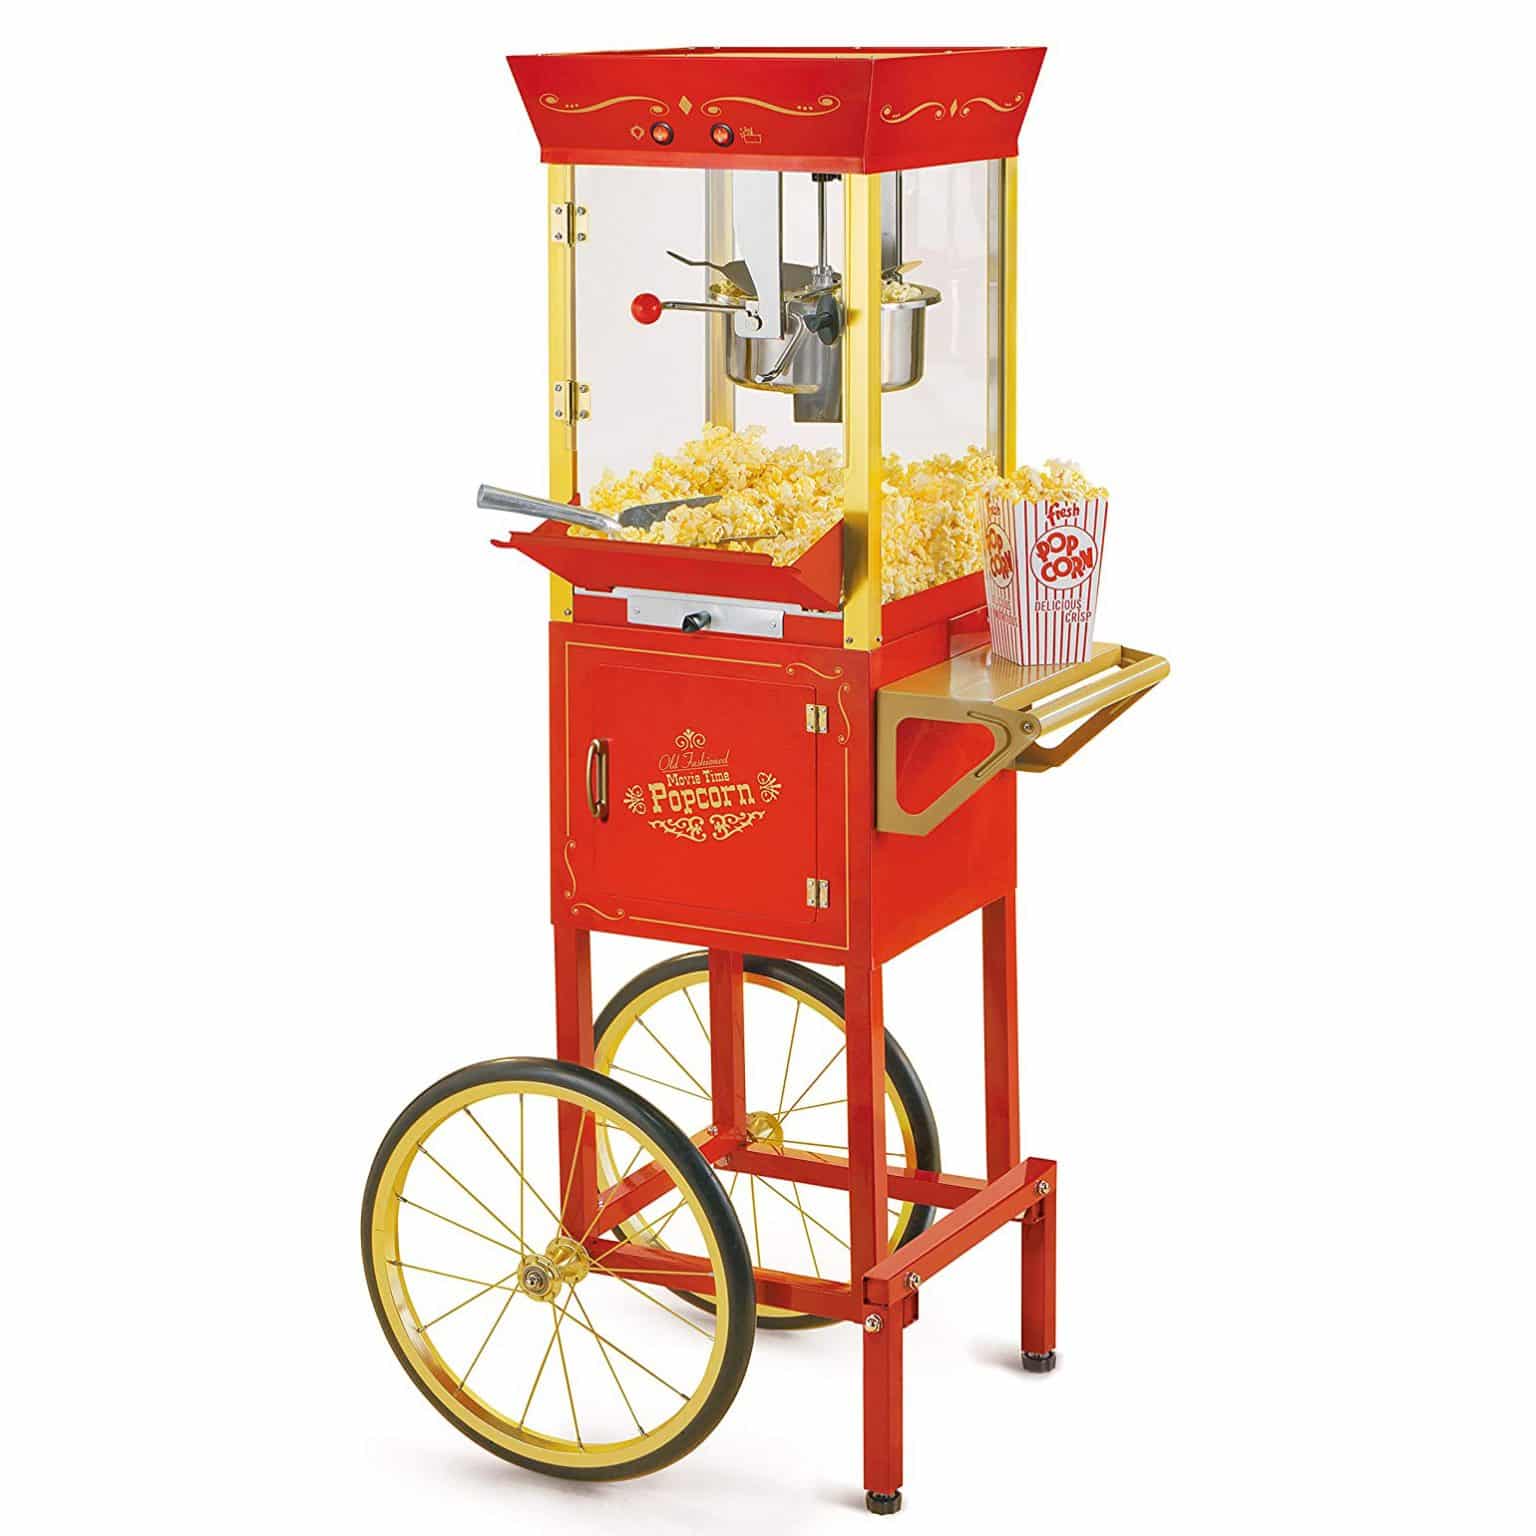 Top 10 Best Popcorn Machines in 2021 Reviews - Guide Me